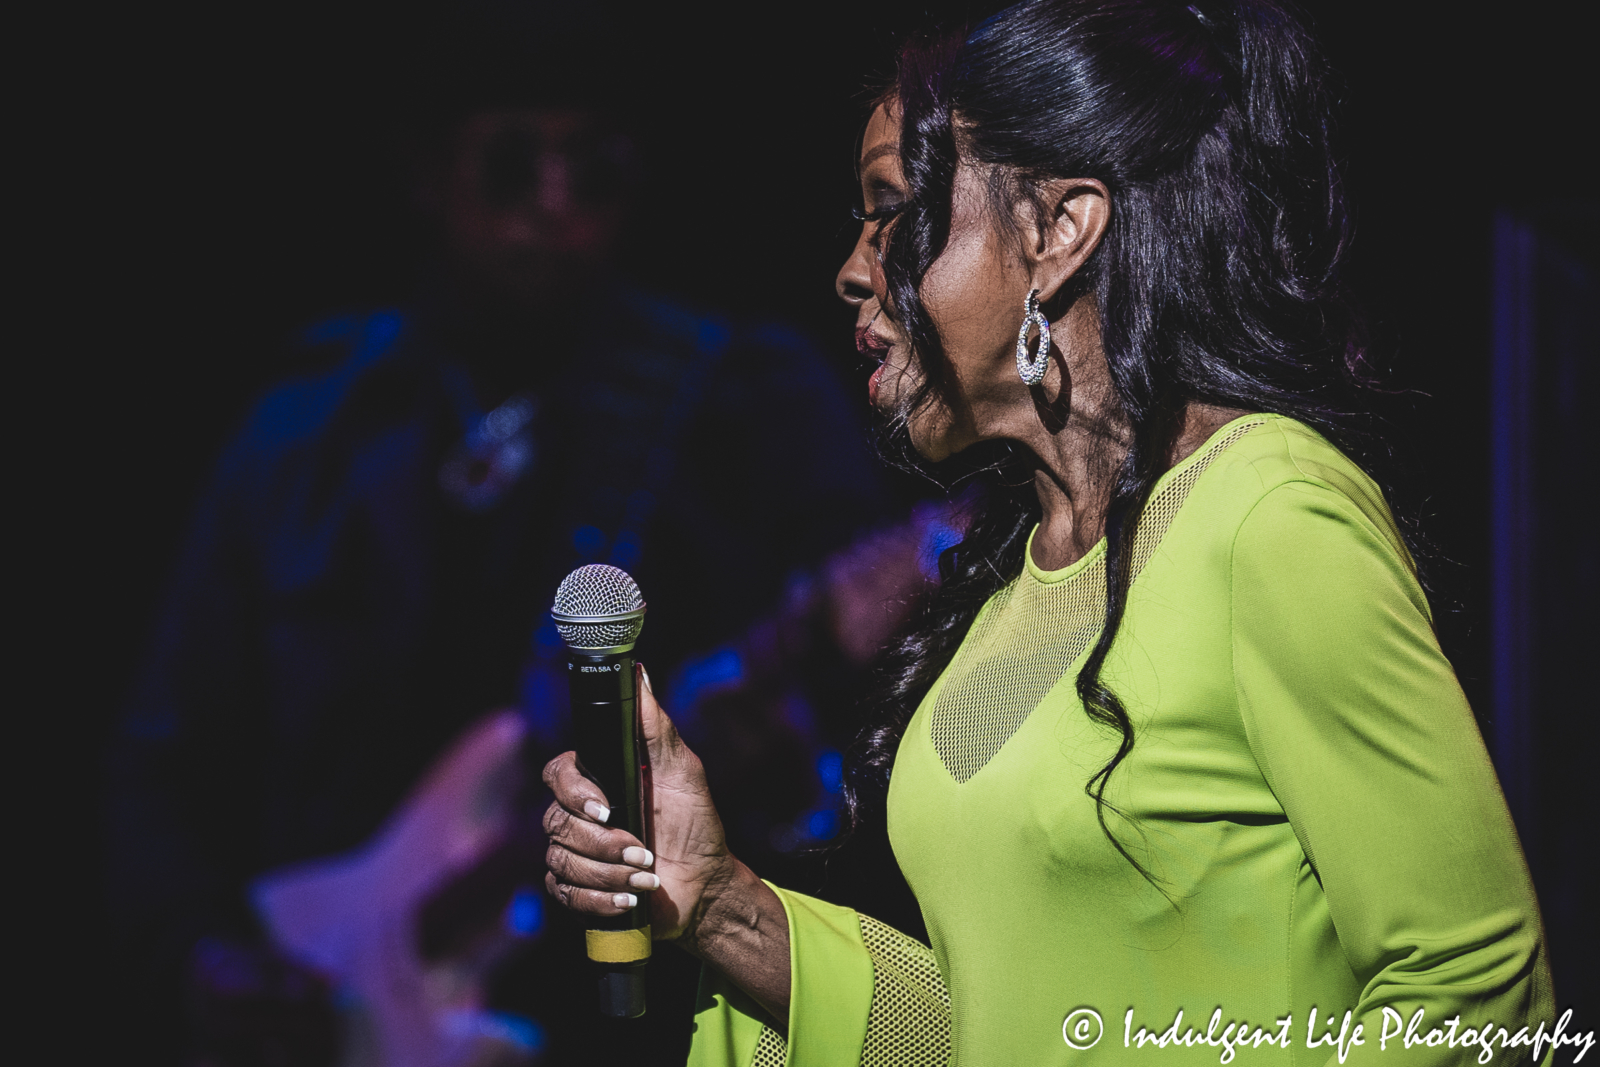 The "Empress of Soul" Gladys Knight singing live in concert at Kauffman Center for the Performing Arts in downtown Kansas City, MO on November 19, 2023.